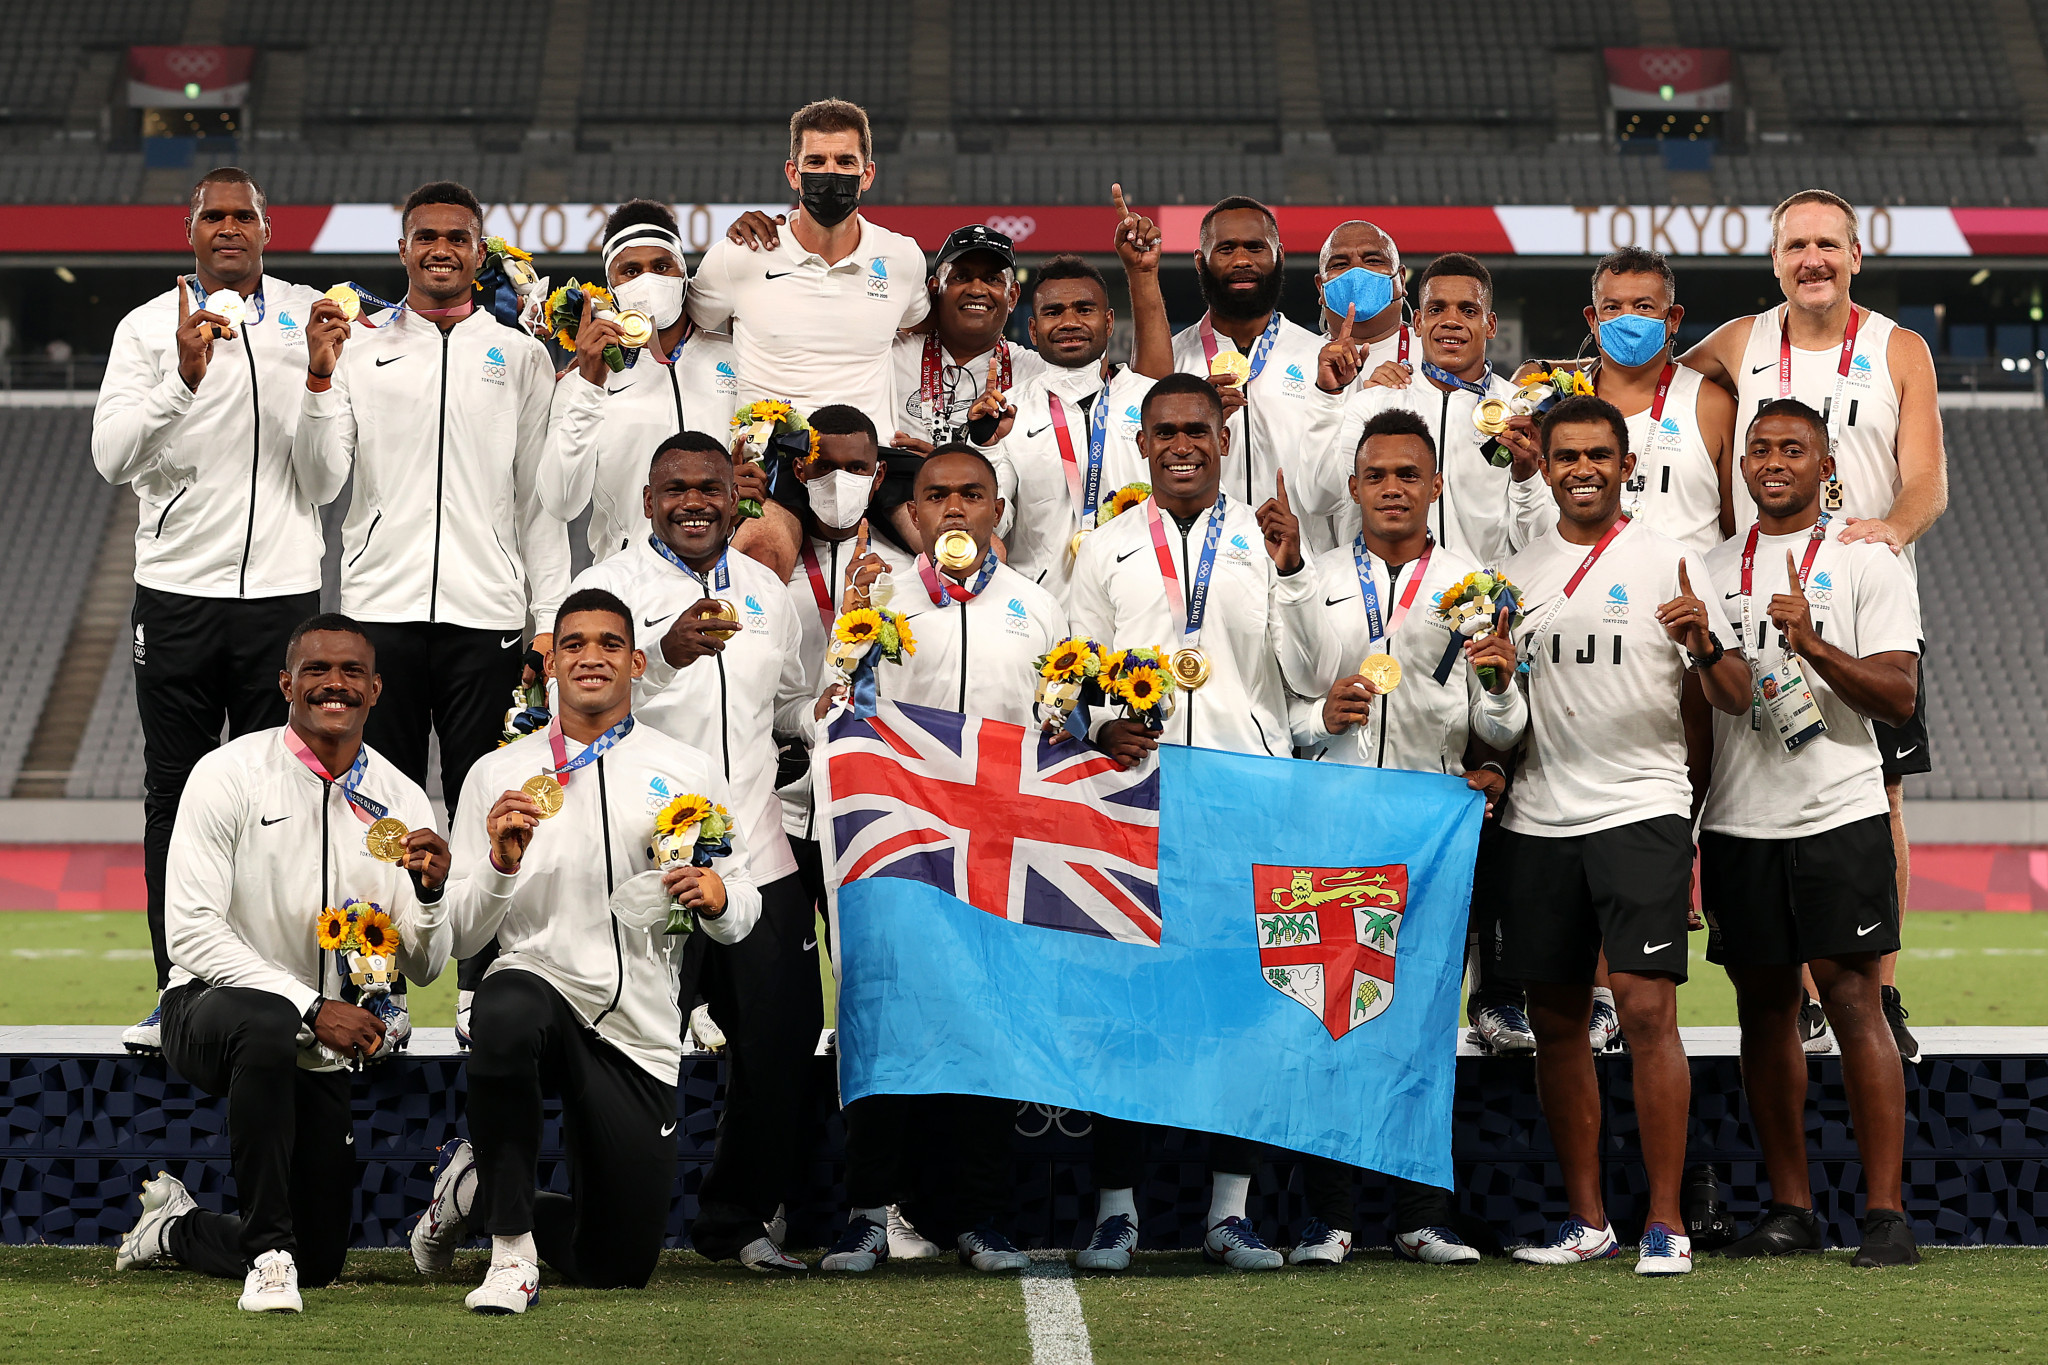 Fiji's men's rugby sevens team won their second gold in a row ©Getty Images